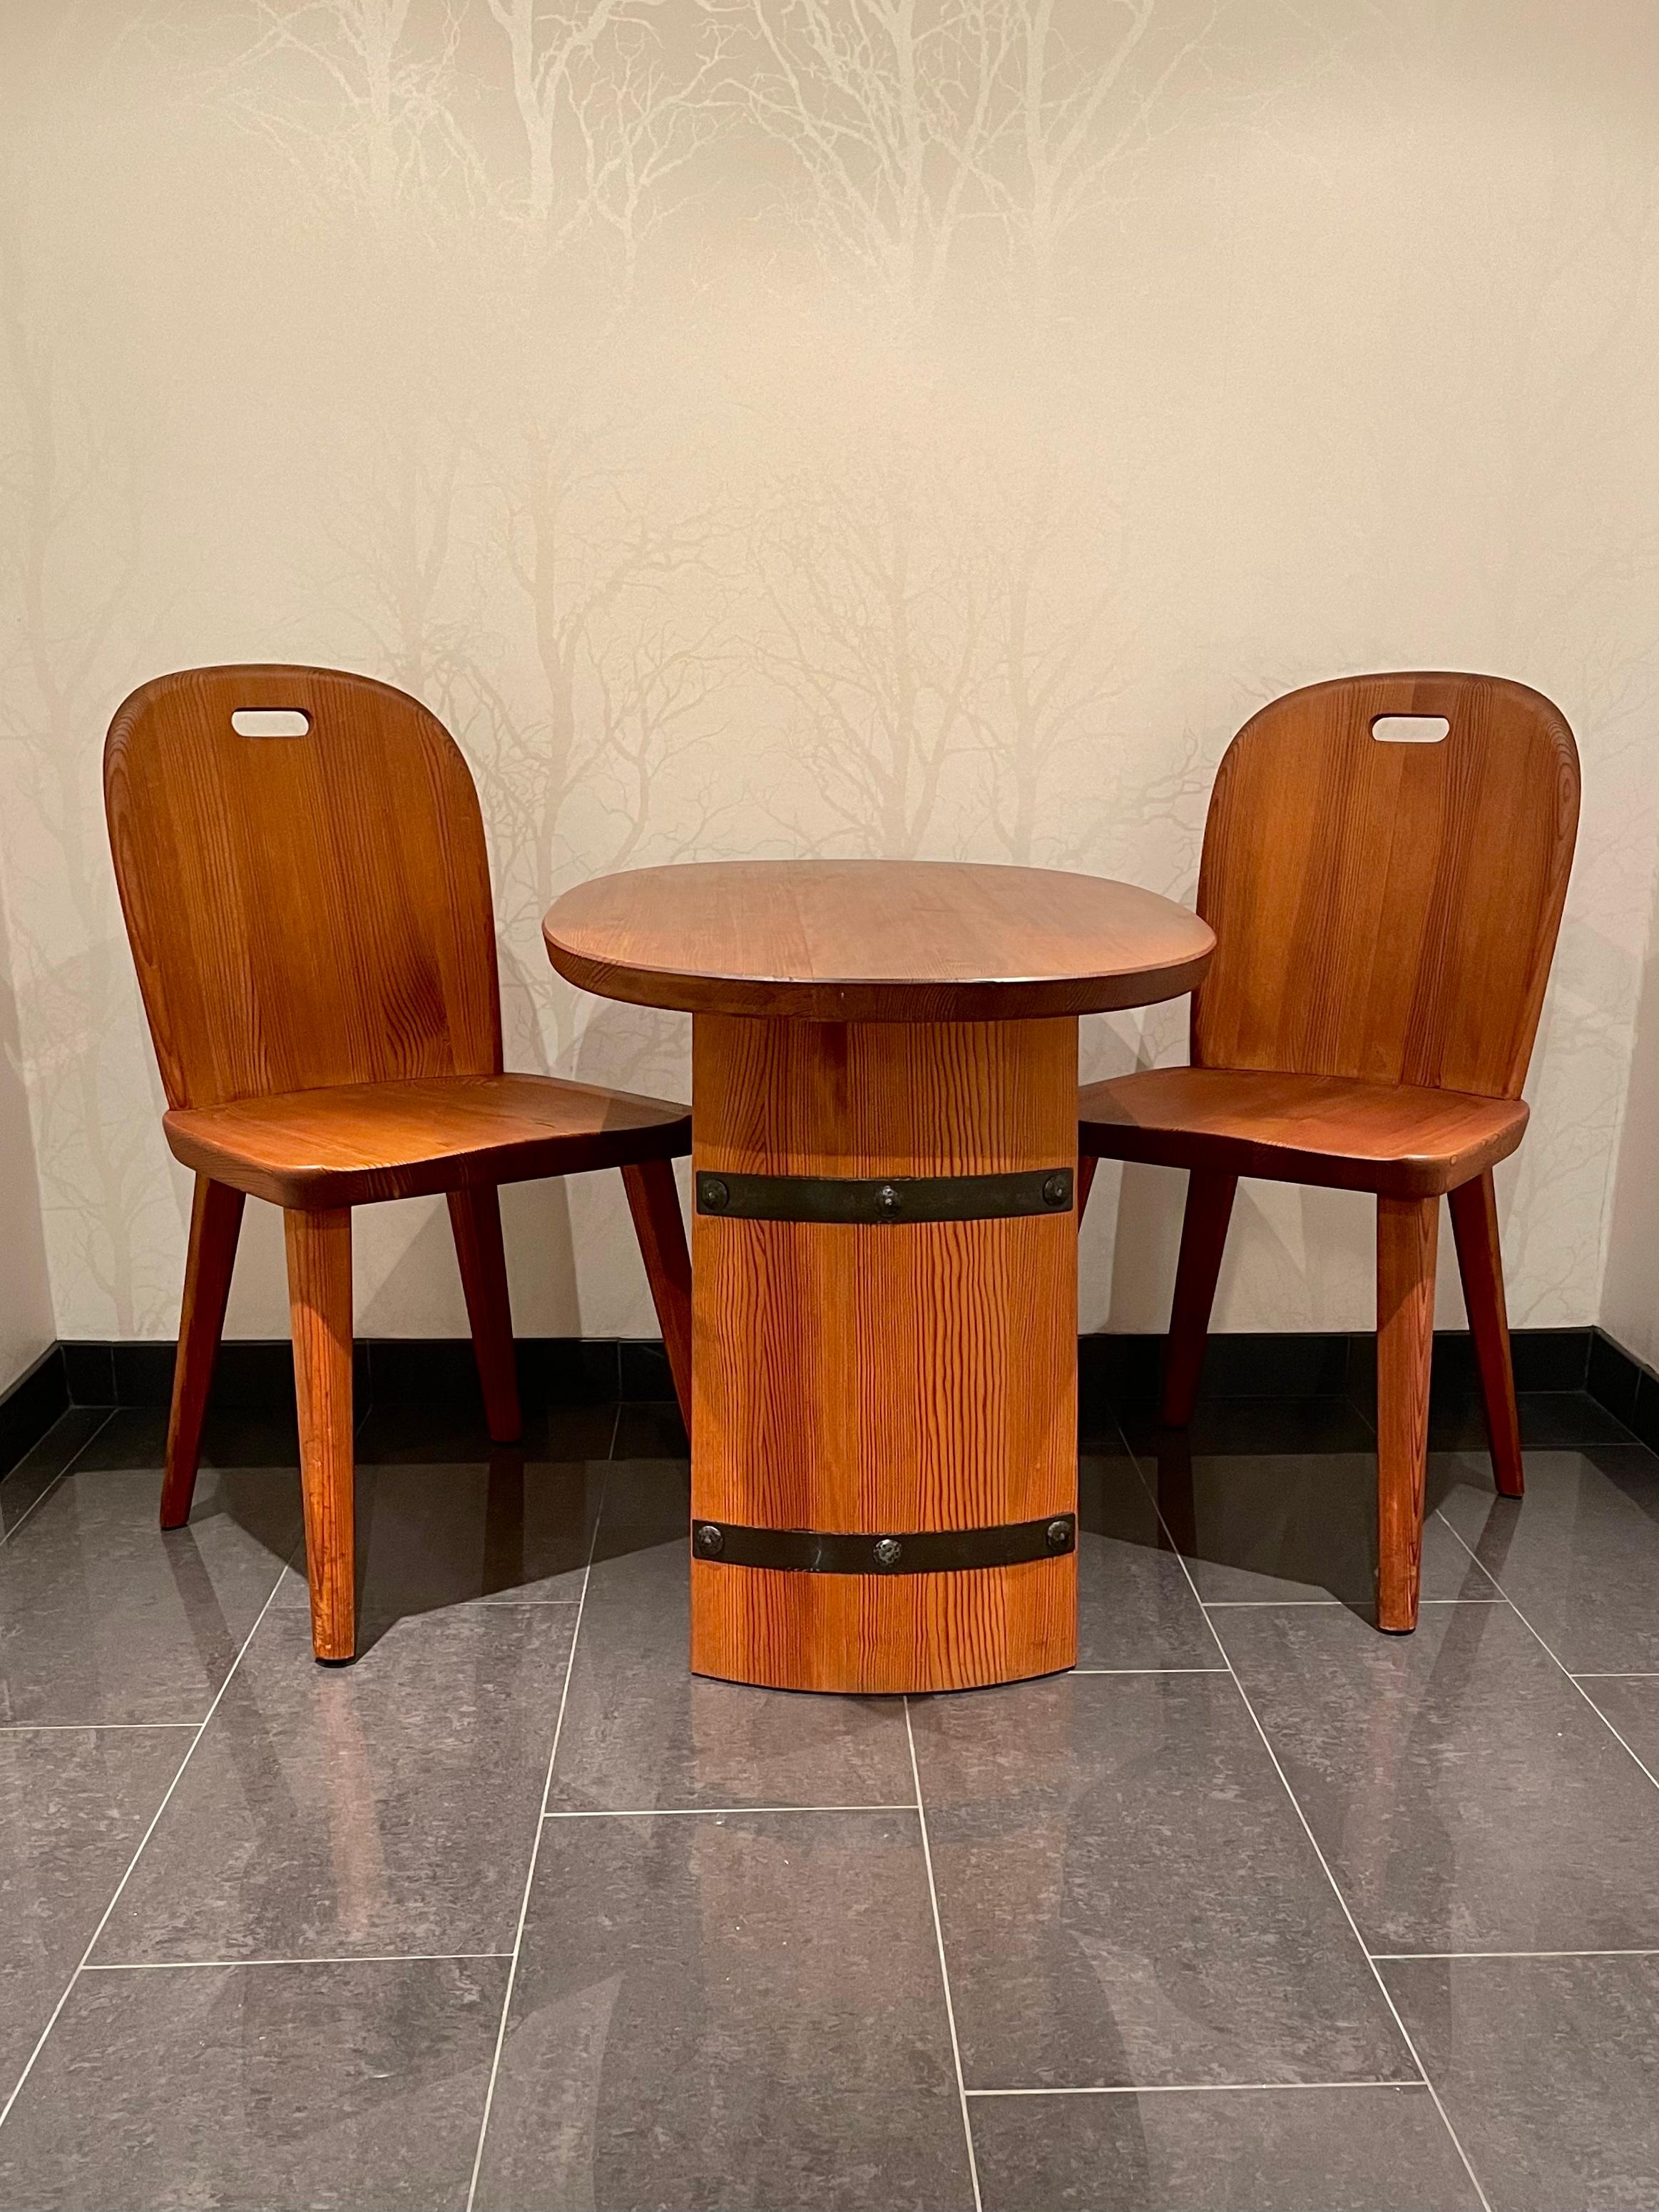 This is the Swedish pine coffee table set “Lövåsen” in Axel Einar Hjorth-style, manufactured by Åby Möbelfabrik in the 1930/40s. 

This stained solid pine set comes with a table and two chairs. 
The table has a 3.5 centimeter thick, oval shaped top